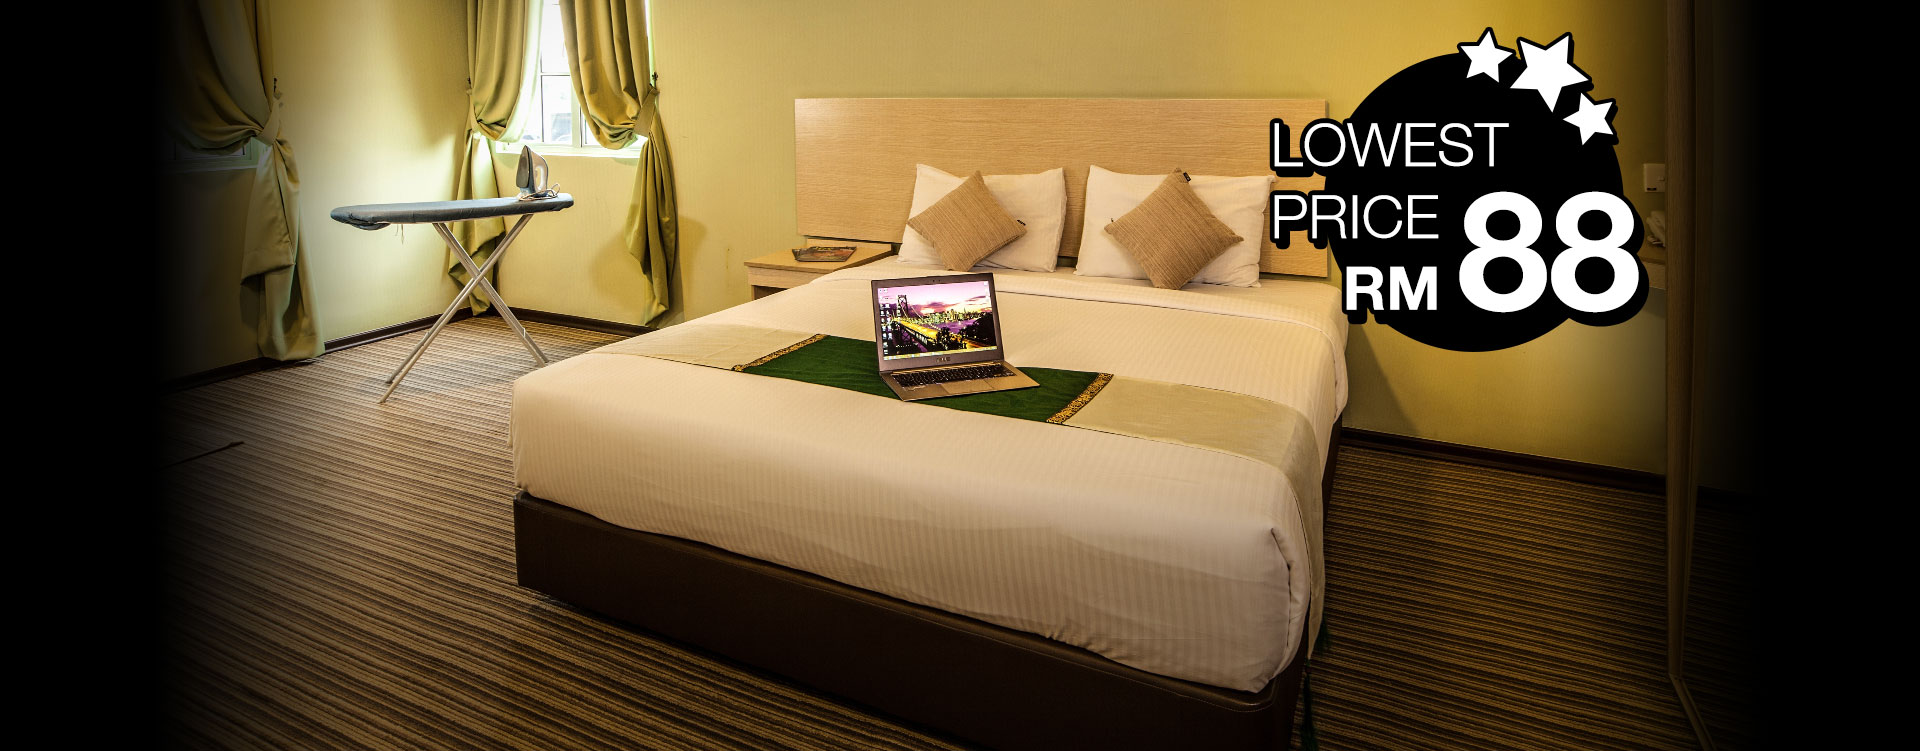 Thy Executive Hotel Standard Double Room - RM88